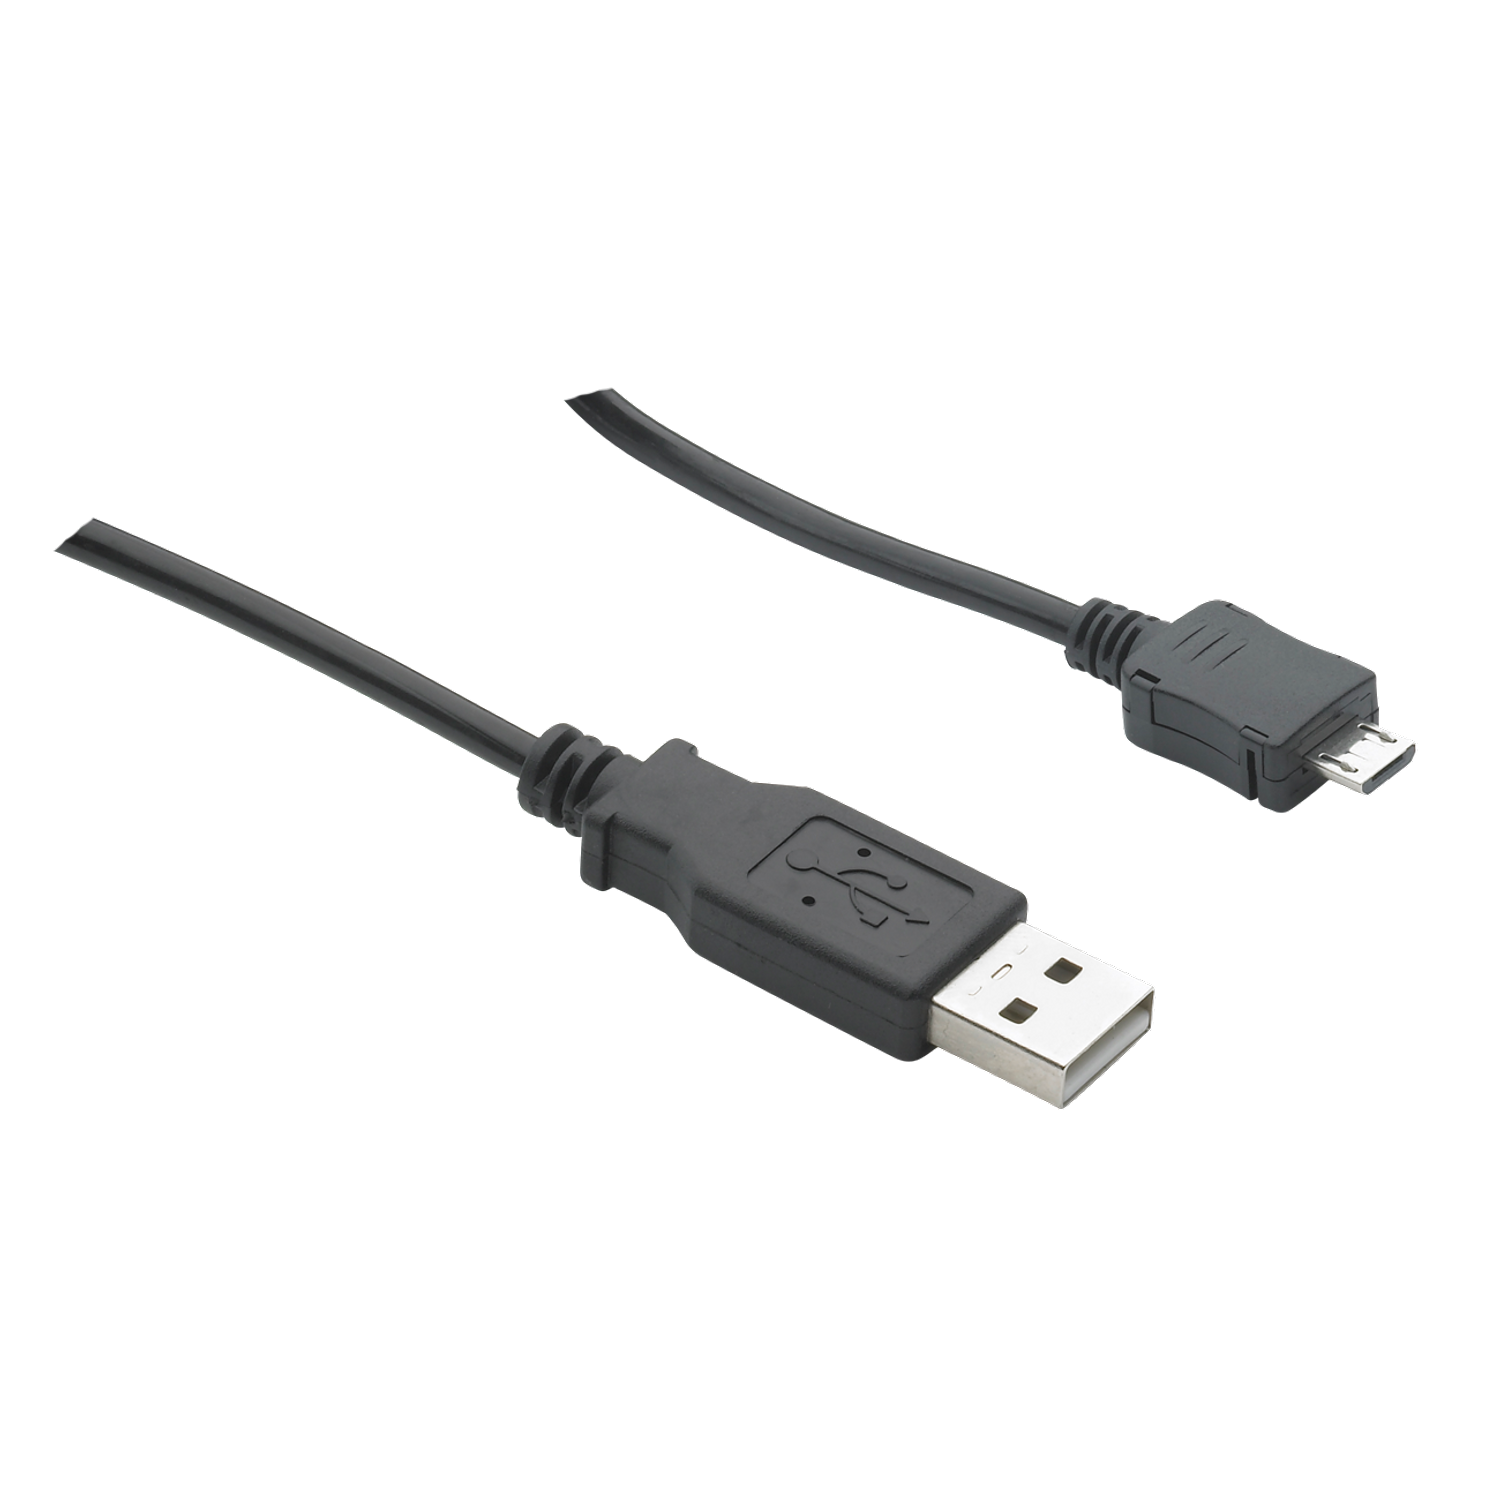 M7 Remote laddkabel (USB to Micro-USB Cable)